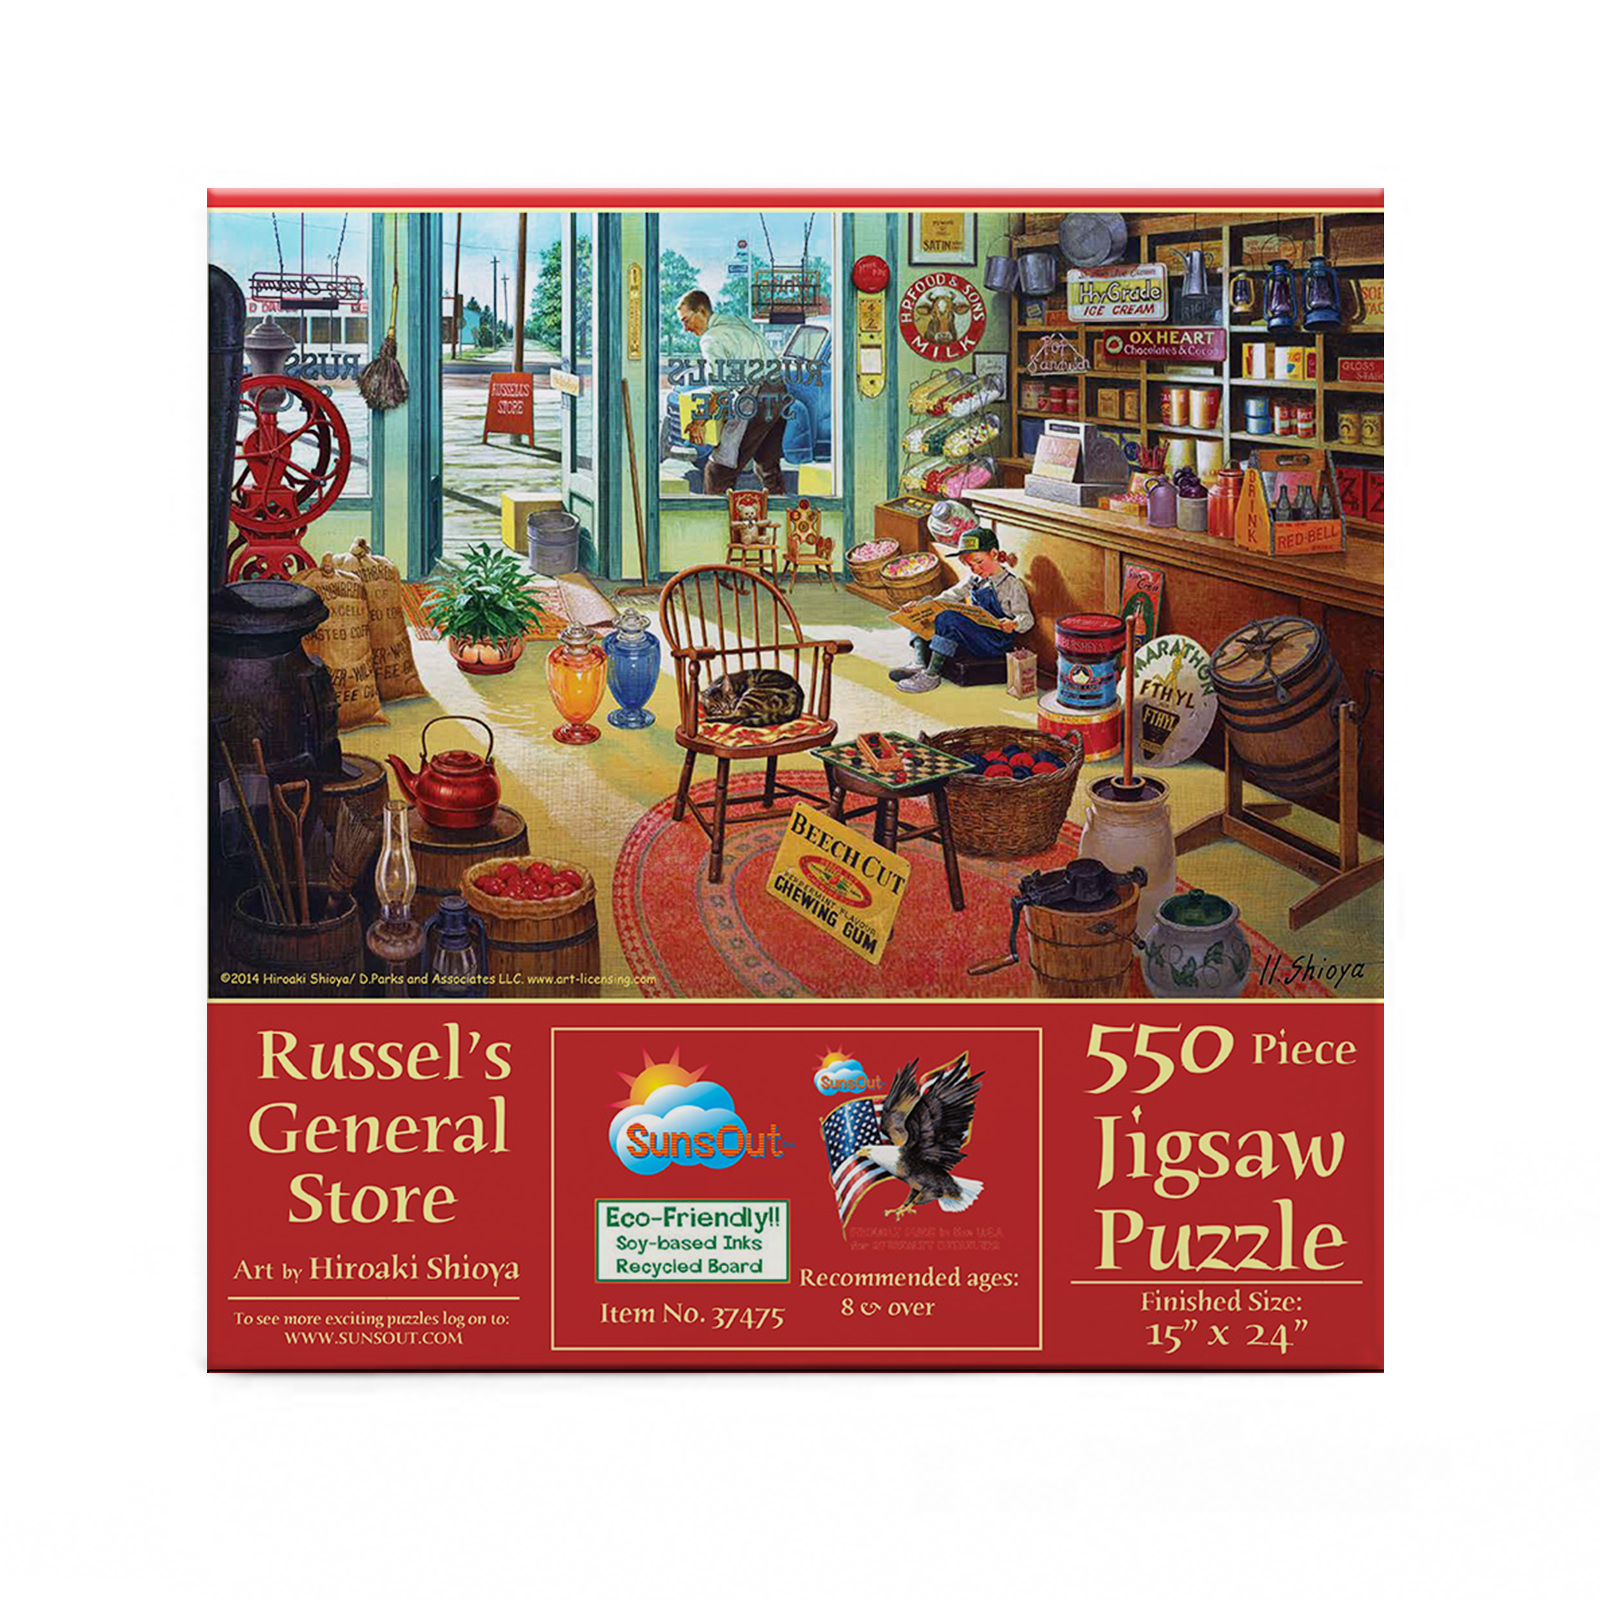 Russel's General Store